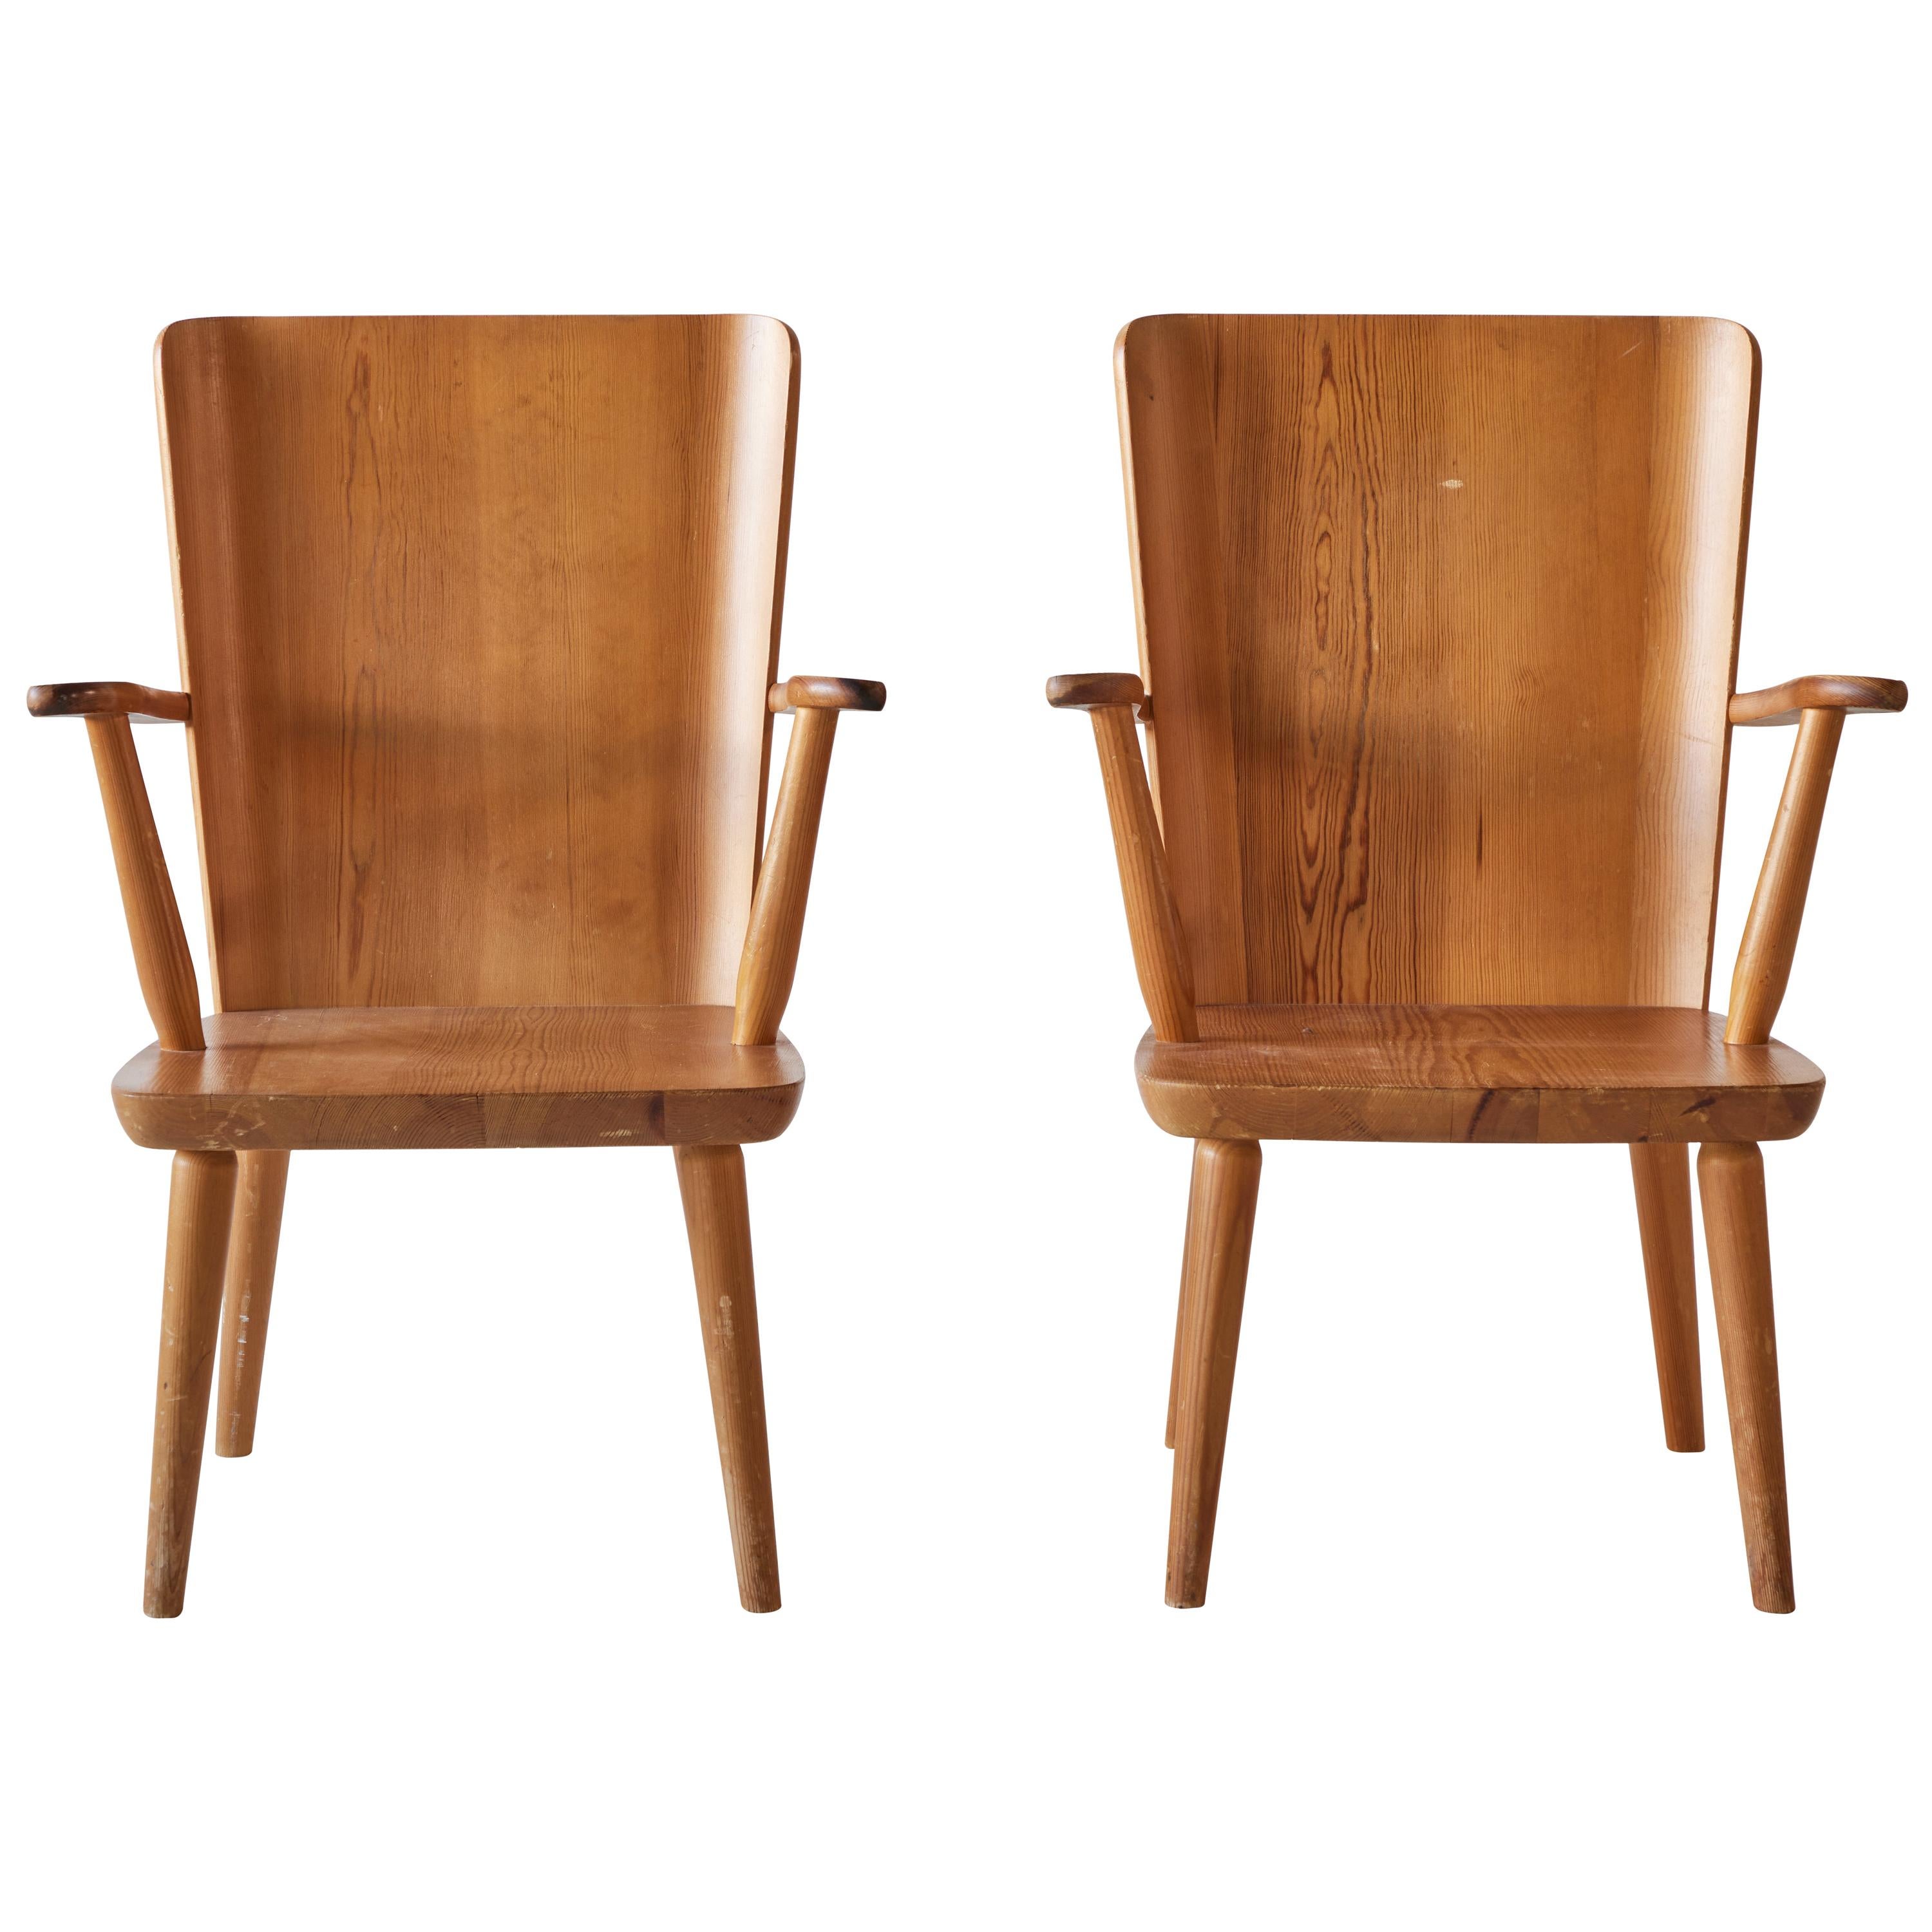 Pair of Pine Chairs by Goran Malmvall for Karl Andersson & Söner, Sweden